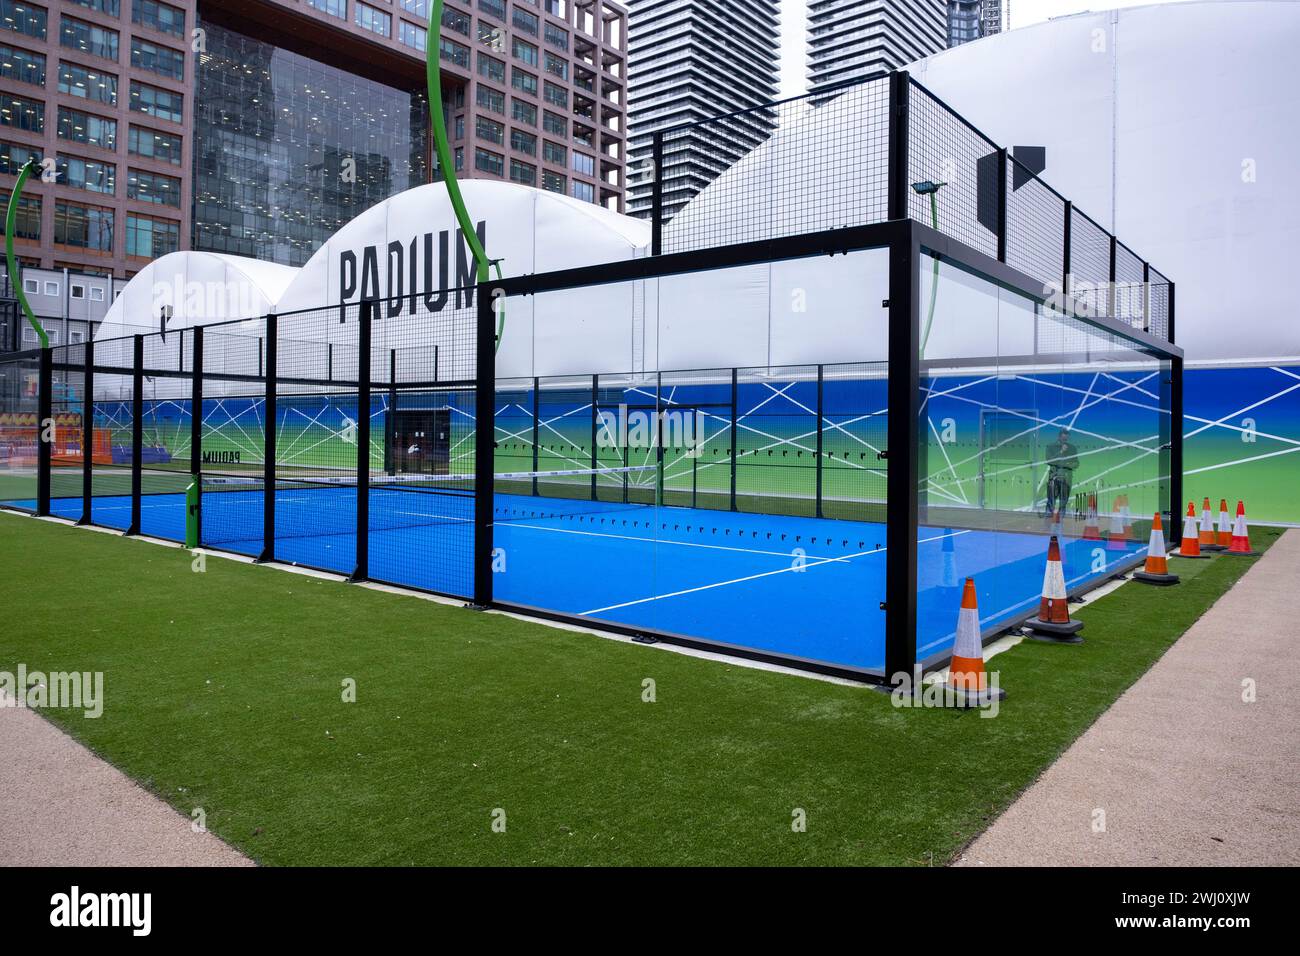 Padel tennis club Padium  at the heart of Canary Wharf financial district on 6th February 2024 in London, United Kingdom. Canary Wharf is an area located near the Isle of Dogs in the London Borough of Tower Hamlets and is defined by the Greater London Authority as being part of Londons central business district. Along with the City of London, it constitutes one of the main financial centres in the United Kingdom and the world, containing many high-rise buildings including the third-tallest in the UK, One Canada Square. Stock Photo